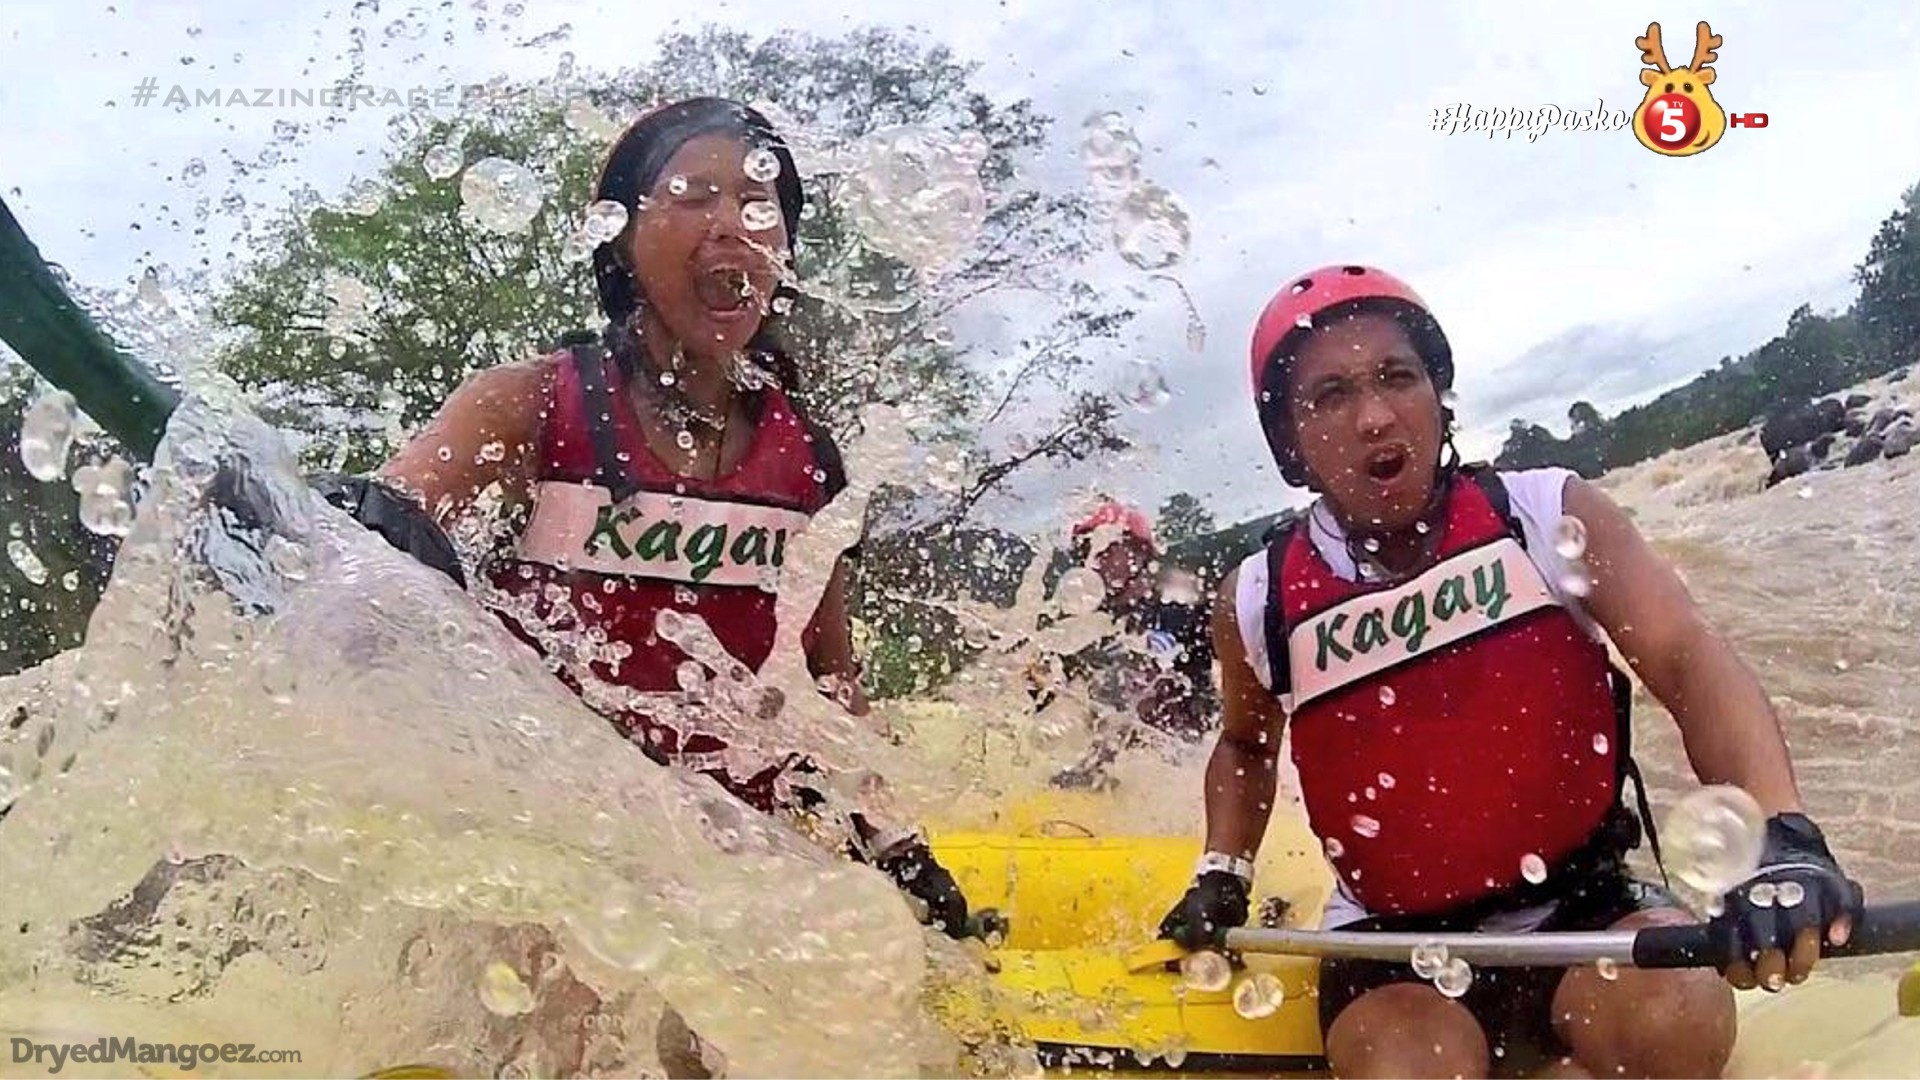 Recap: The Amazing Race Philippines 2, Episode 51 (Leg 9, Day 3) – "Let's just enjoy this while we're here."